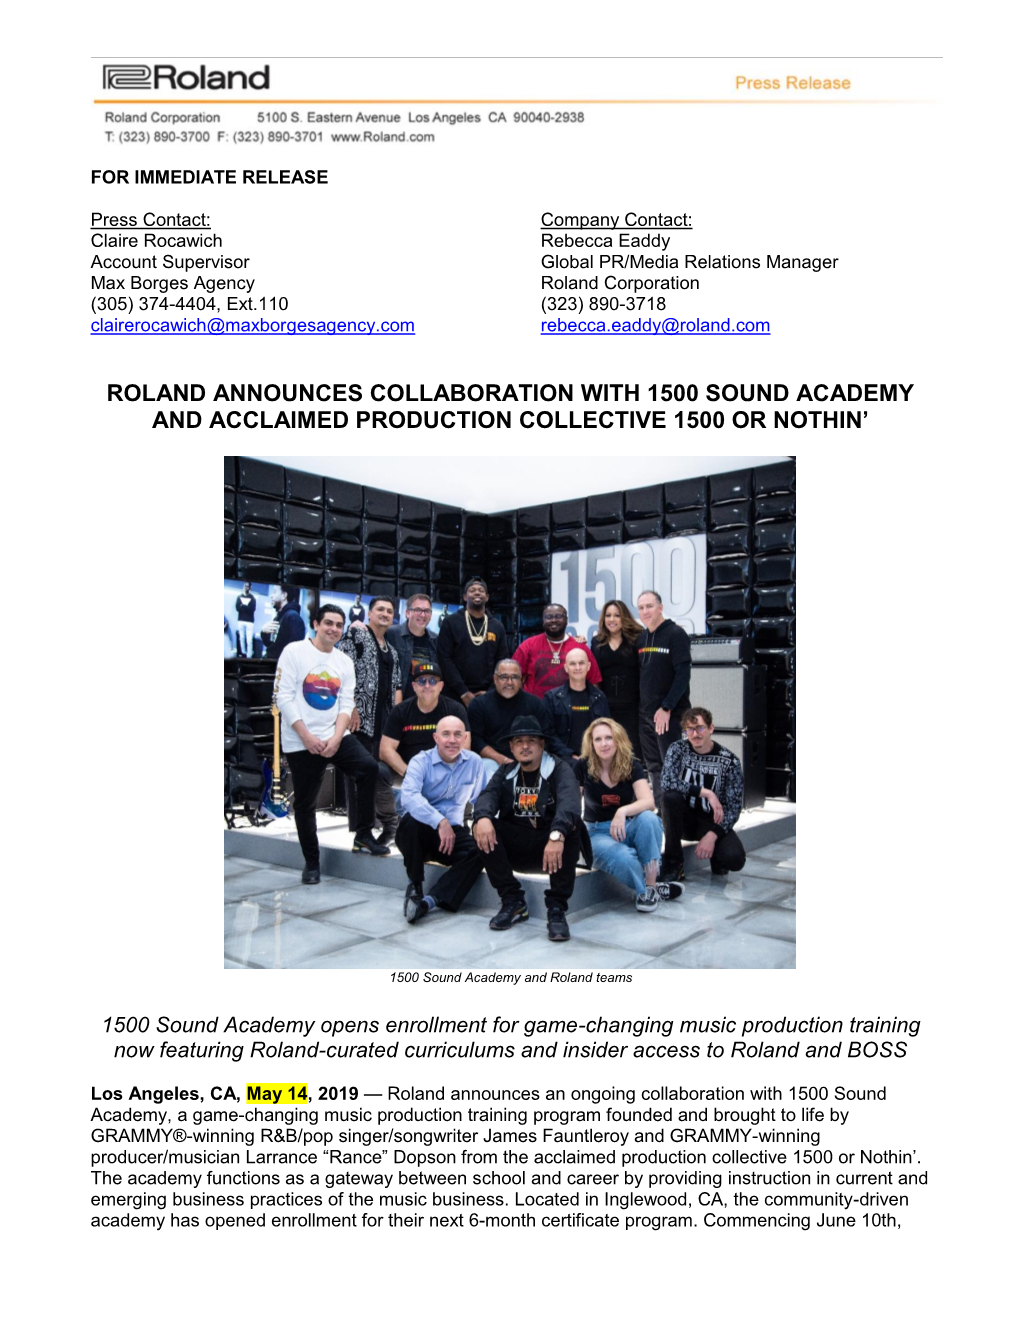 Roland Announces Collaboration with 1500 Sound Academy and Acclaimed Production Collective 1500 Or Nothin’